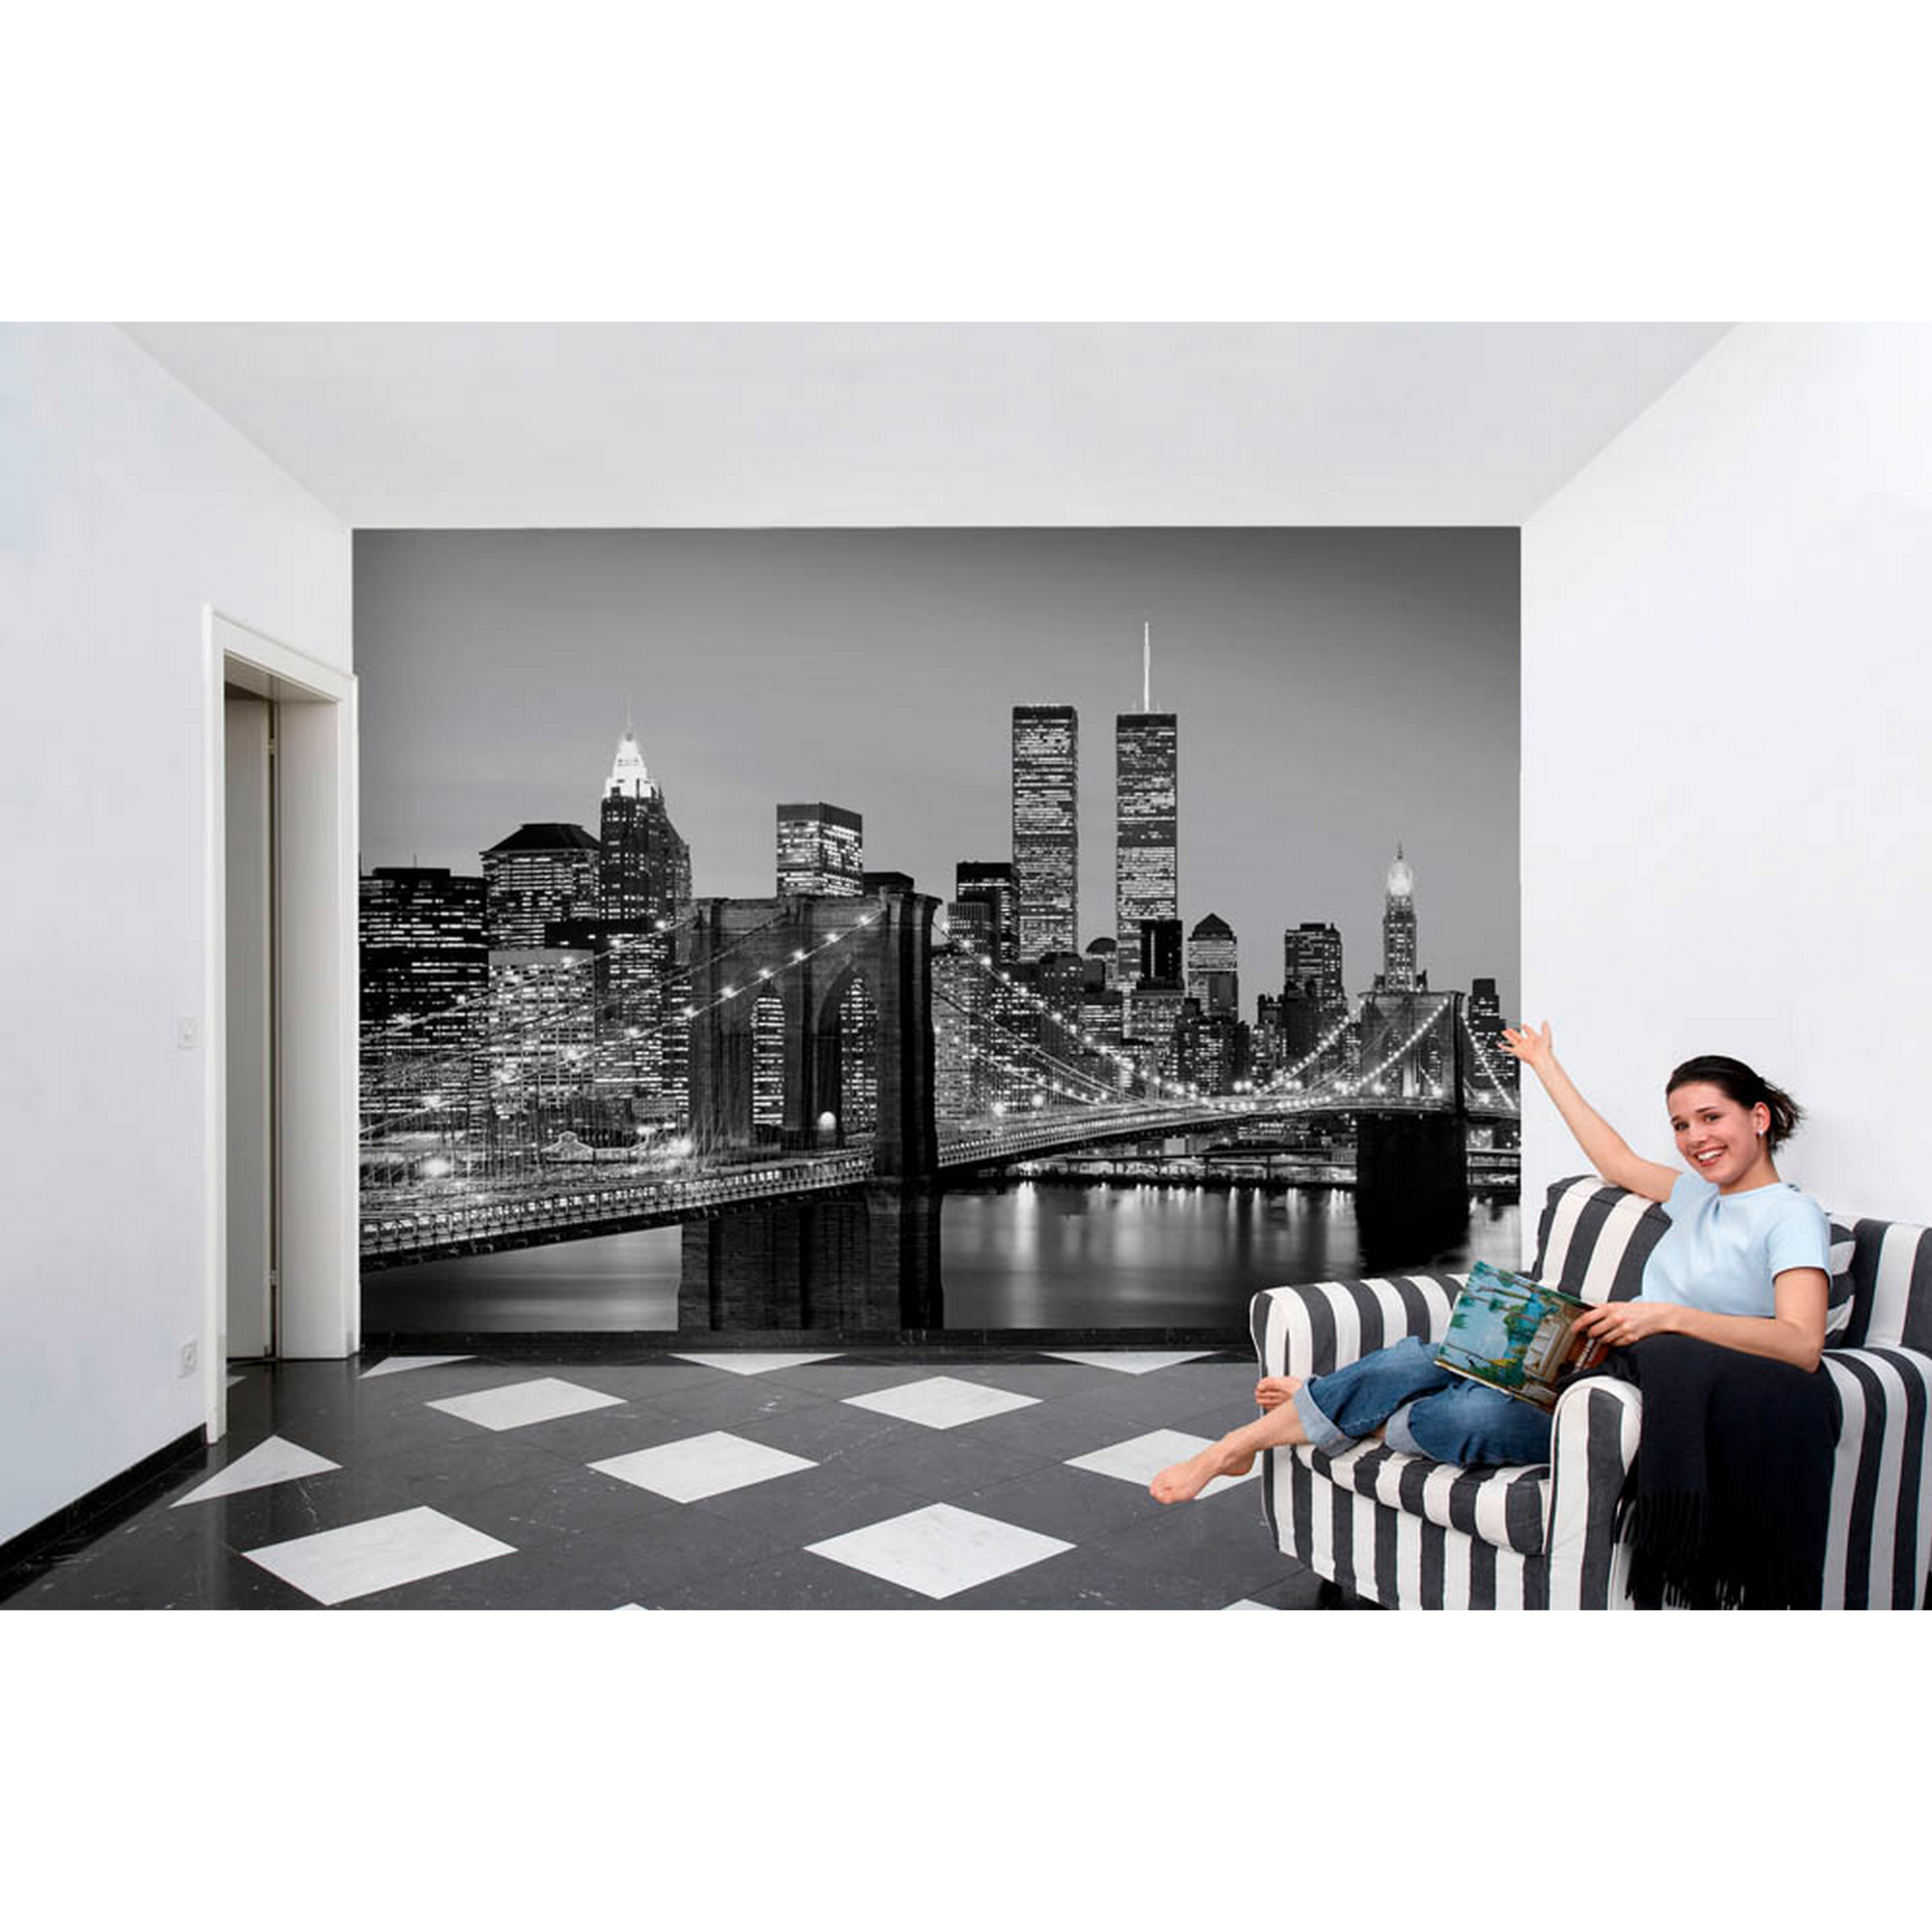 Reinders Fototapete 'New York' 366 x 254 cm + product picture